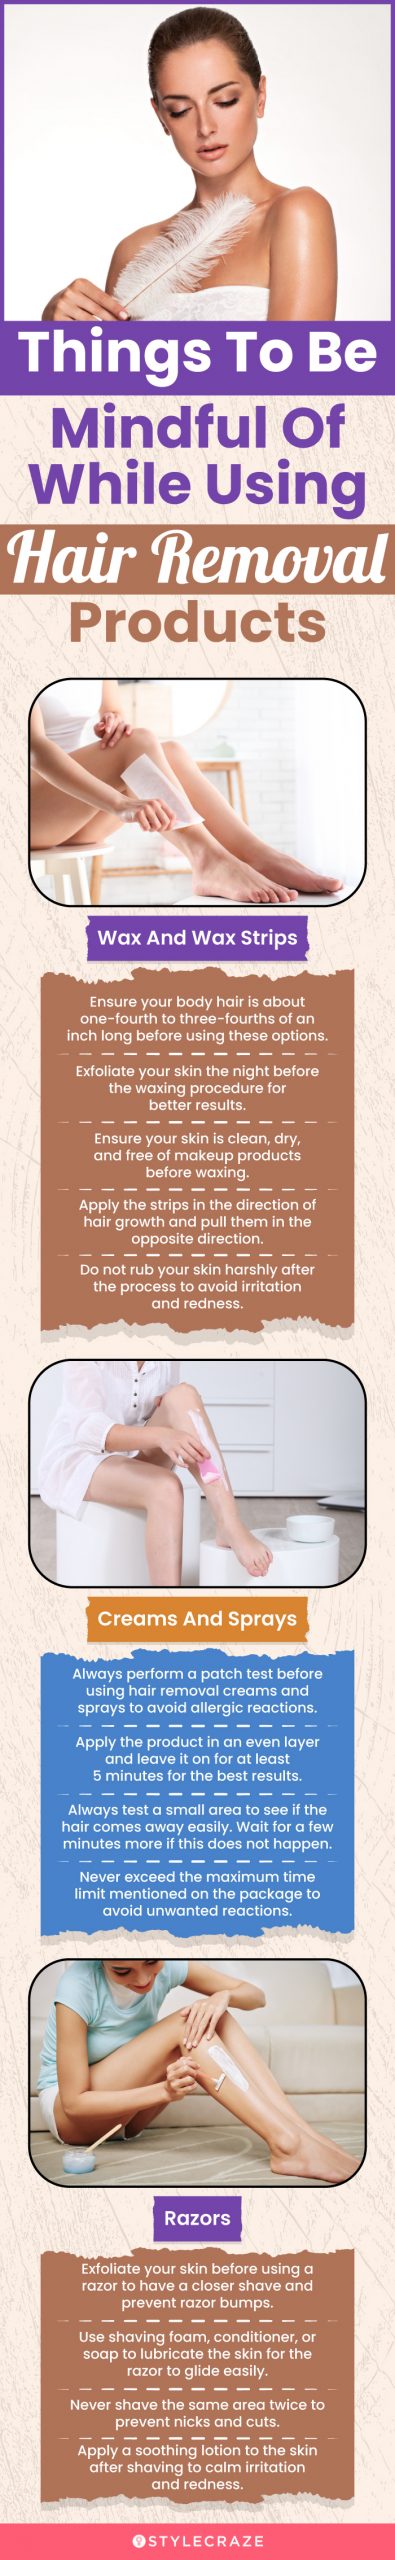 Things To Be Mindful Of While Using Hair Removal Products (infographic)